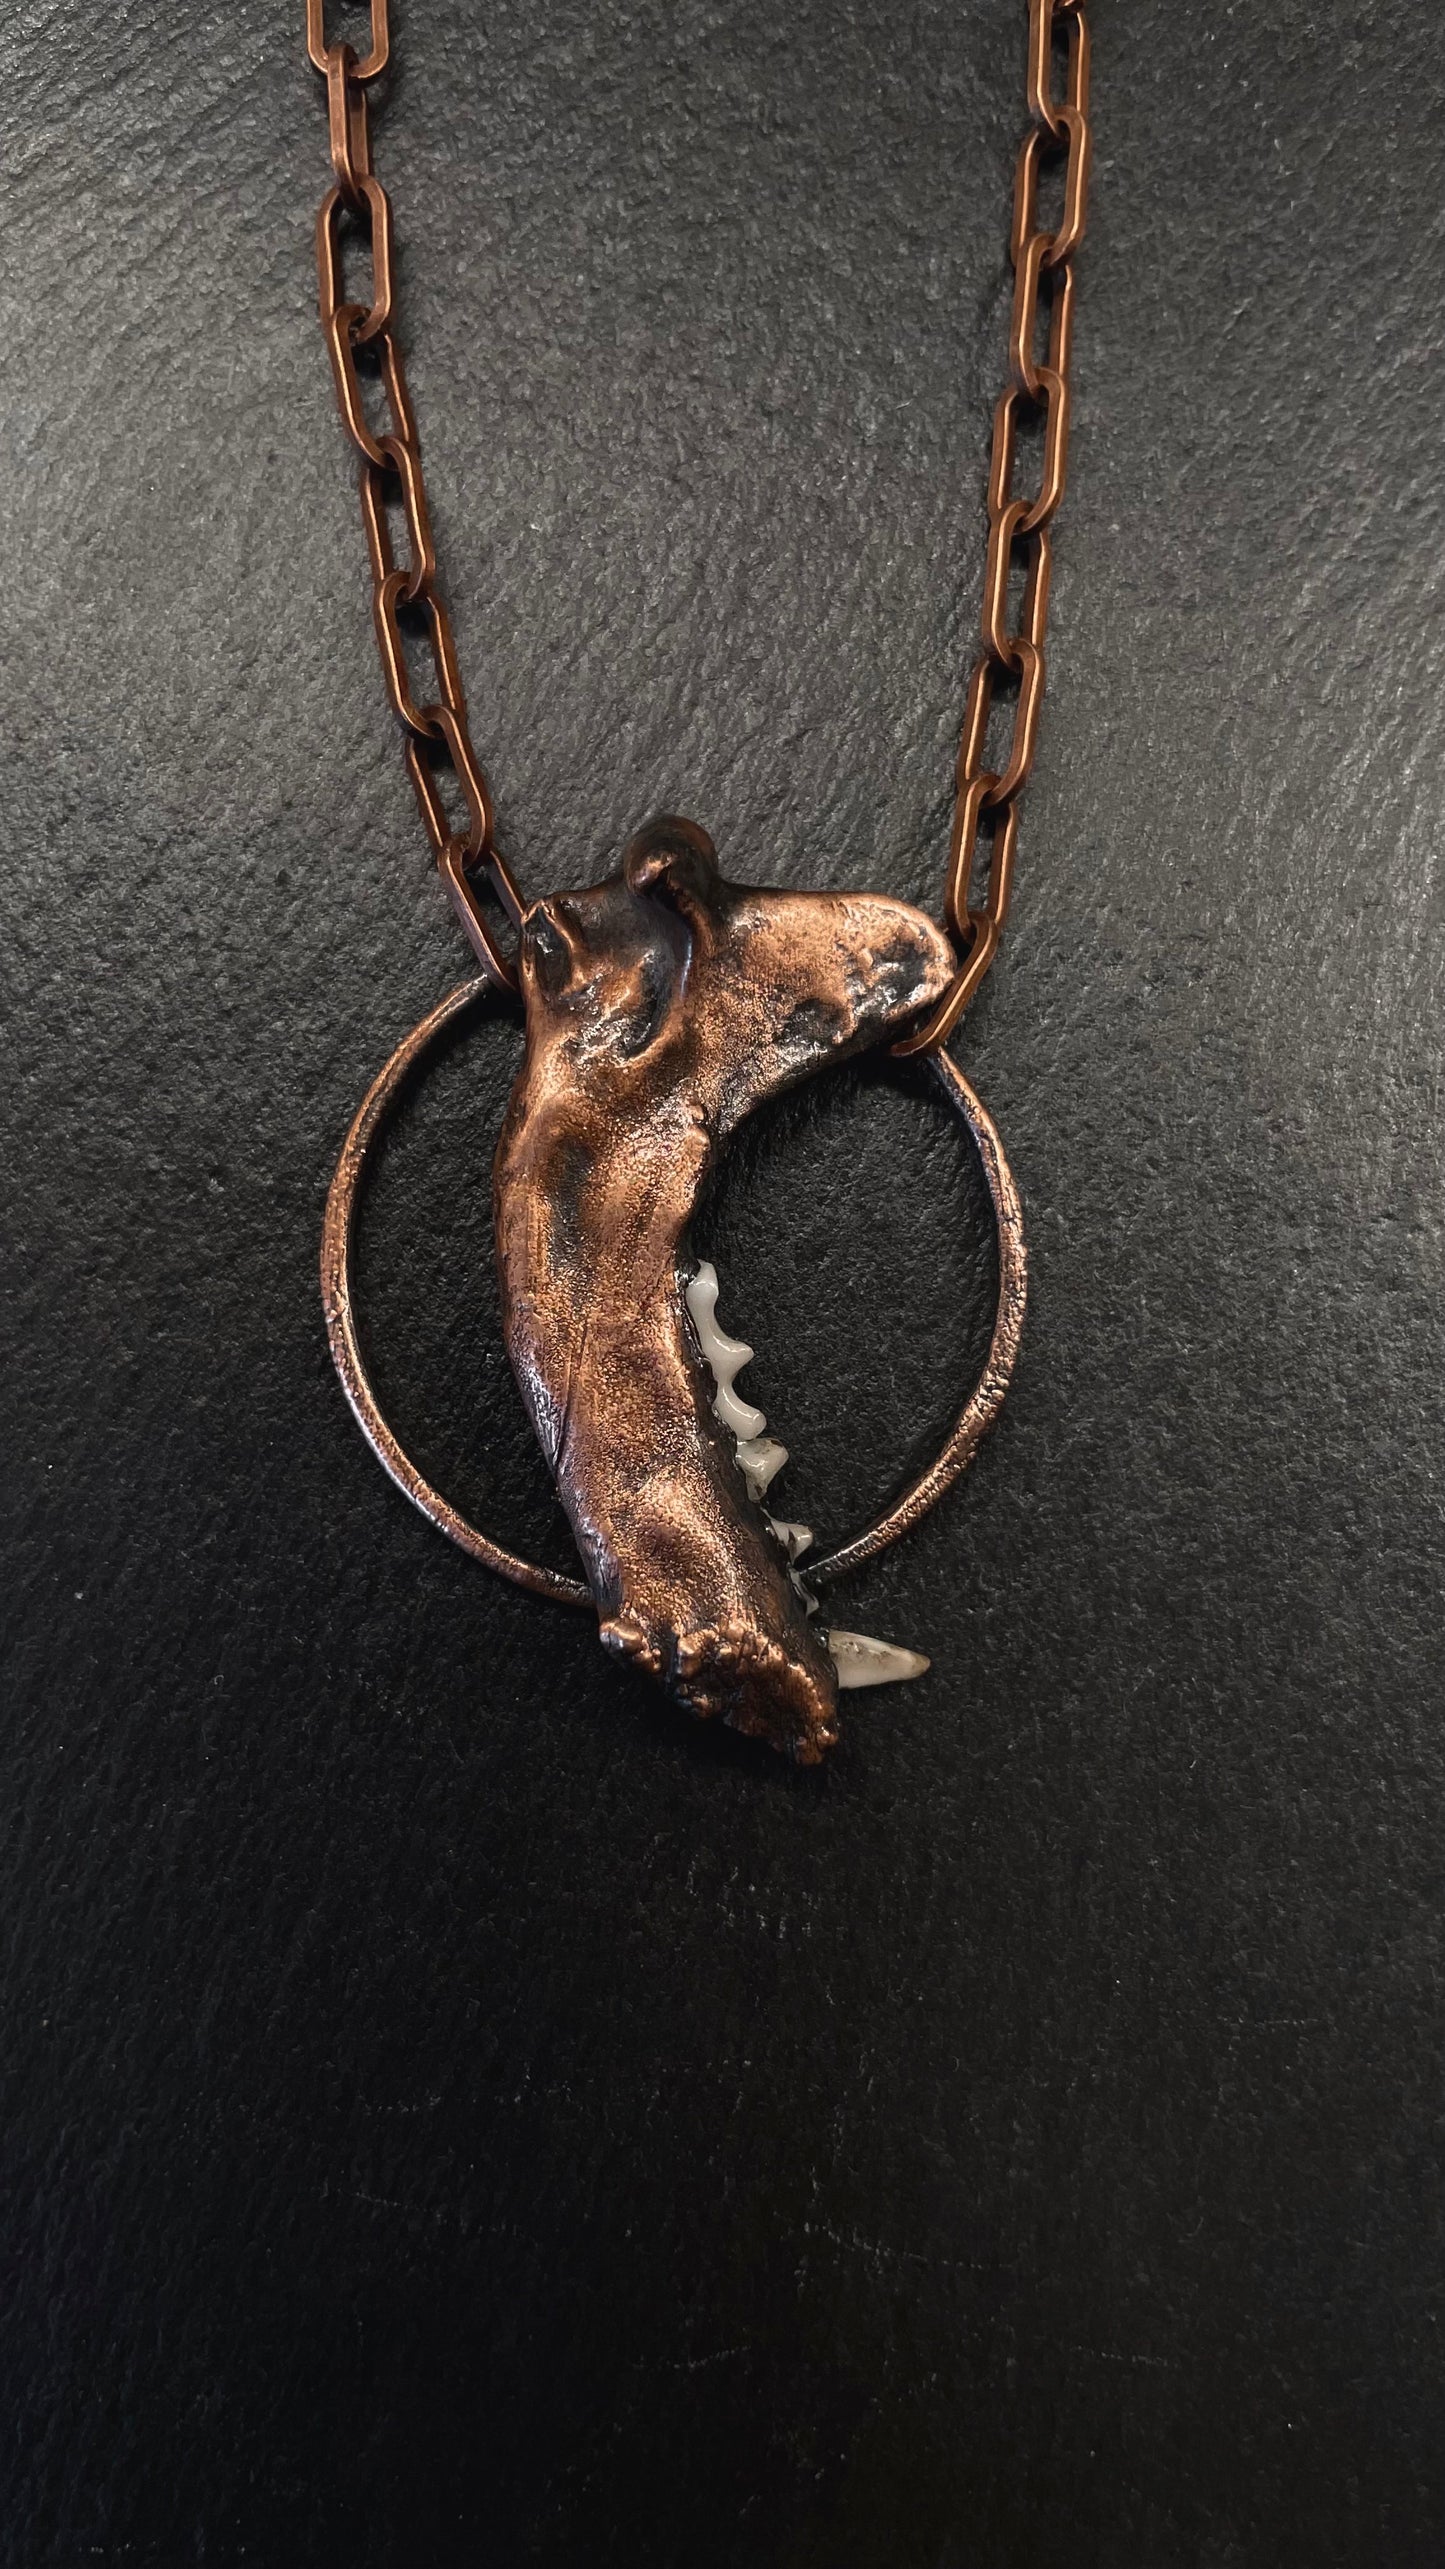 Ethically Sourced Mink Jawbone Necklace Collection by Inex Jewelry